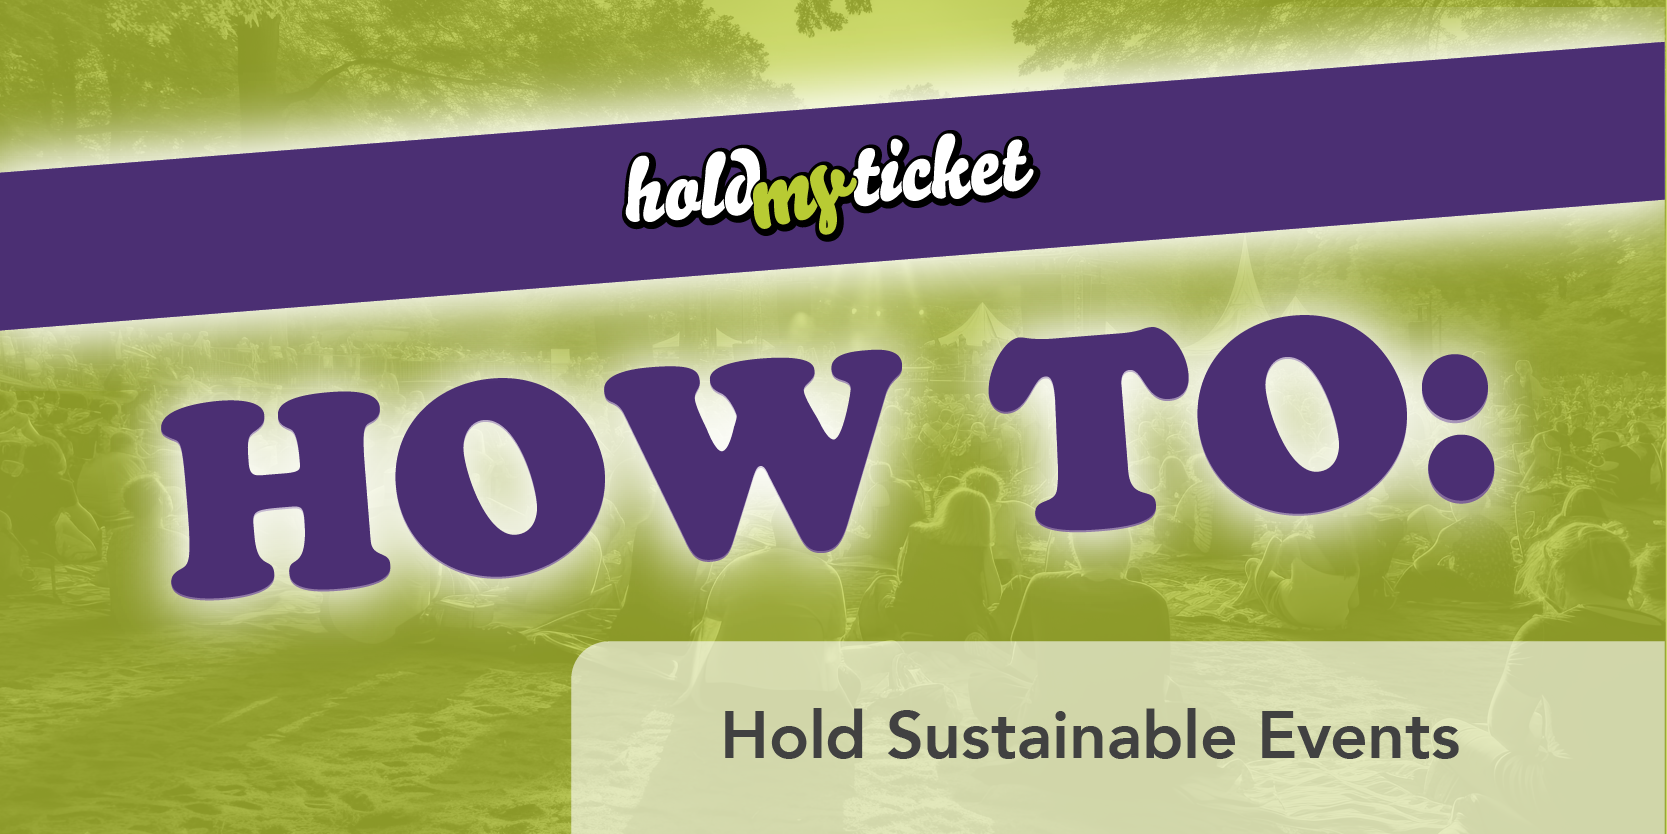 How to: Hold Sustainable Events in purple on a green background